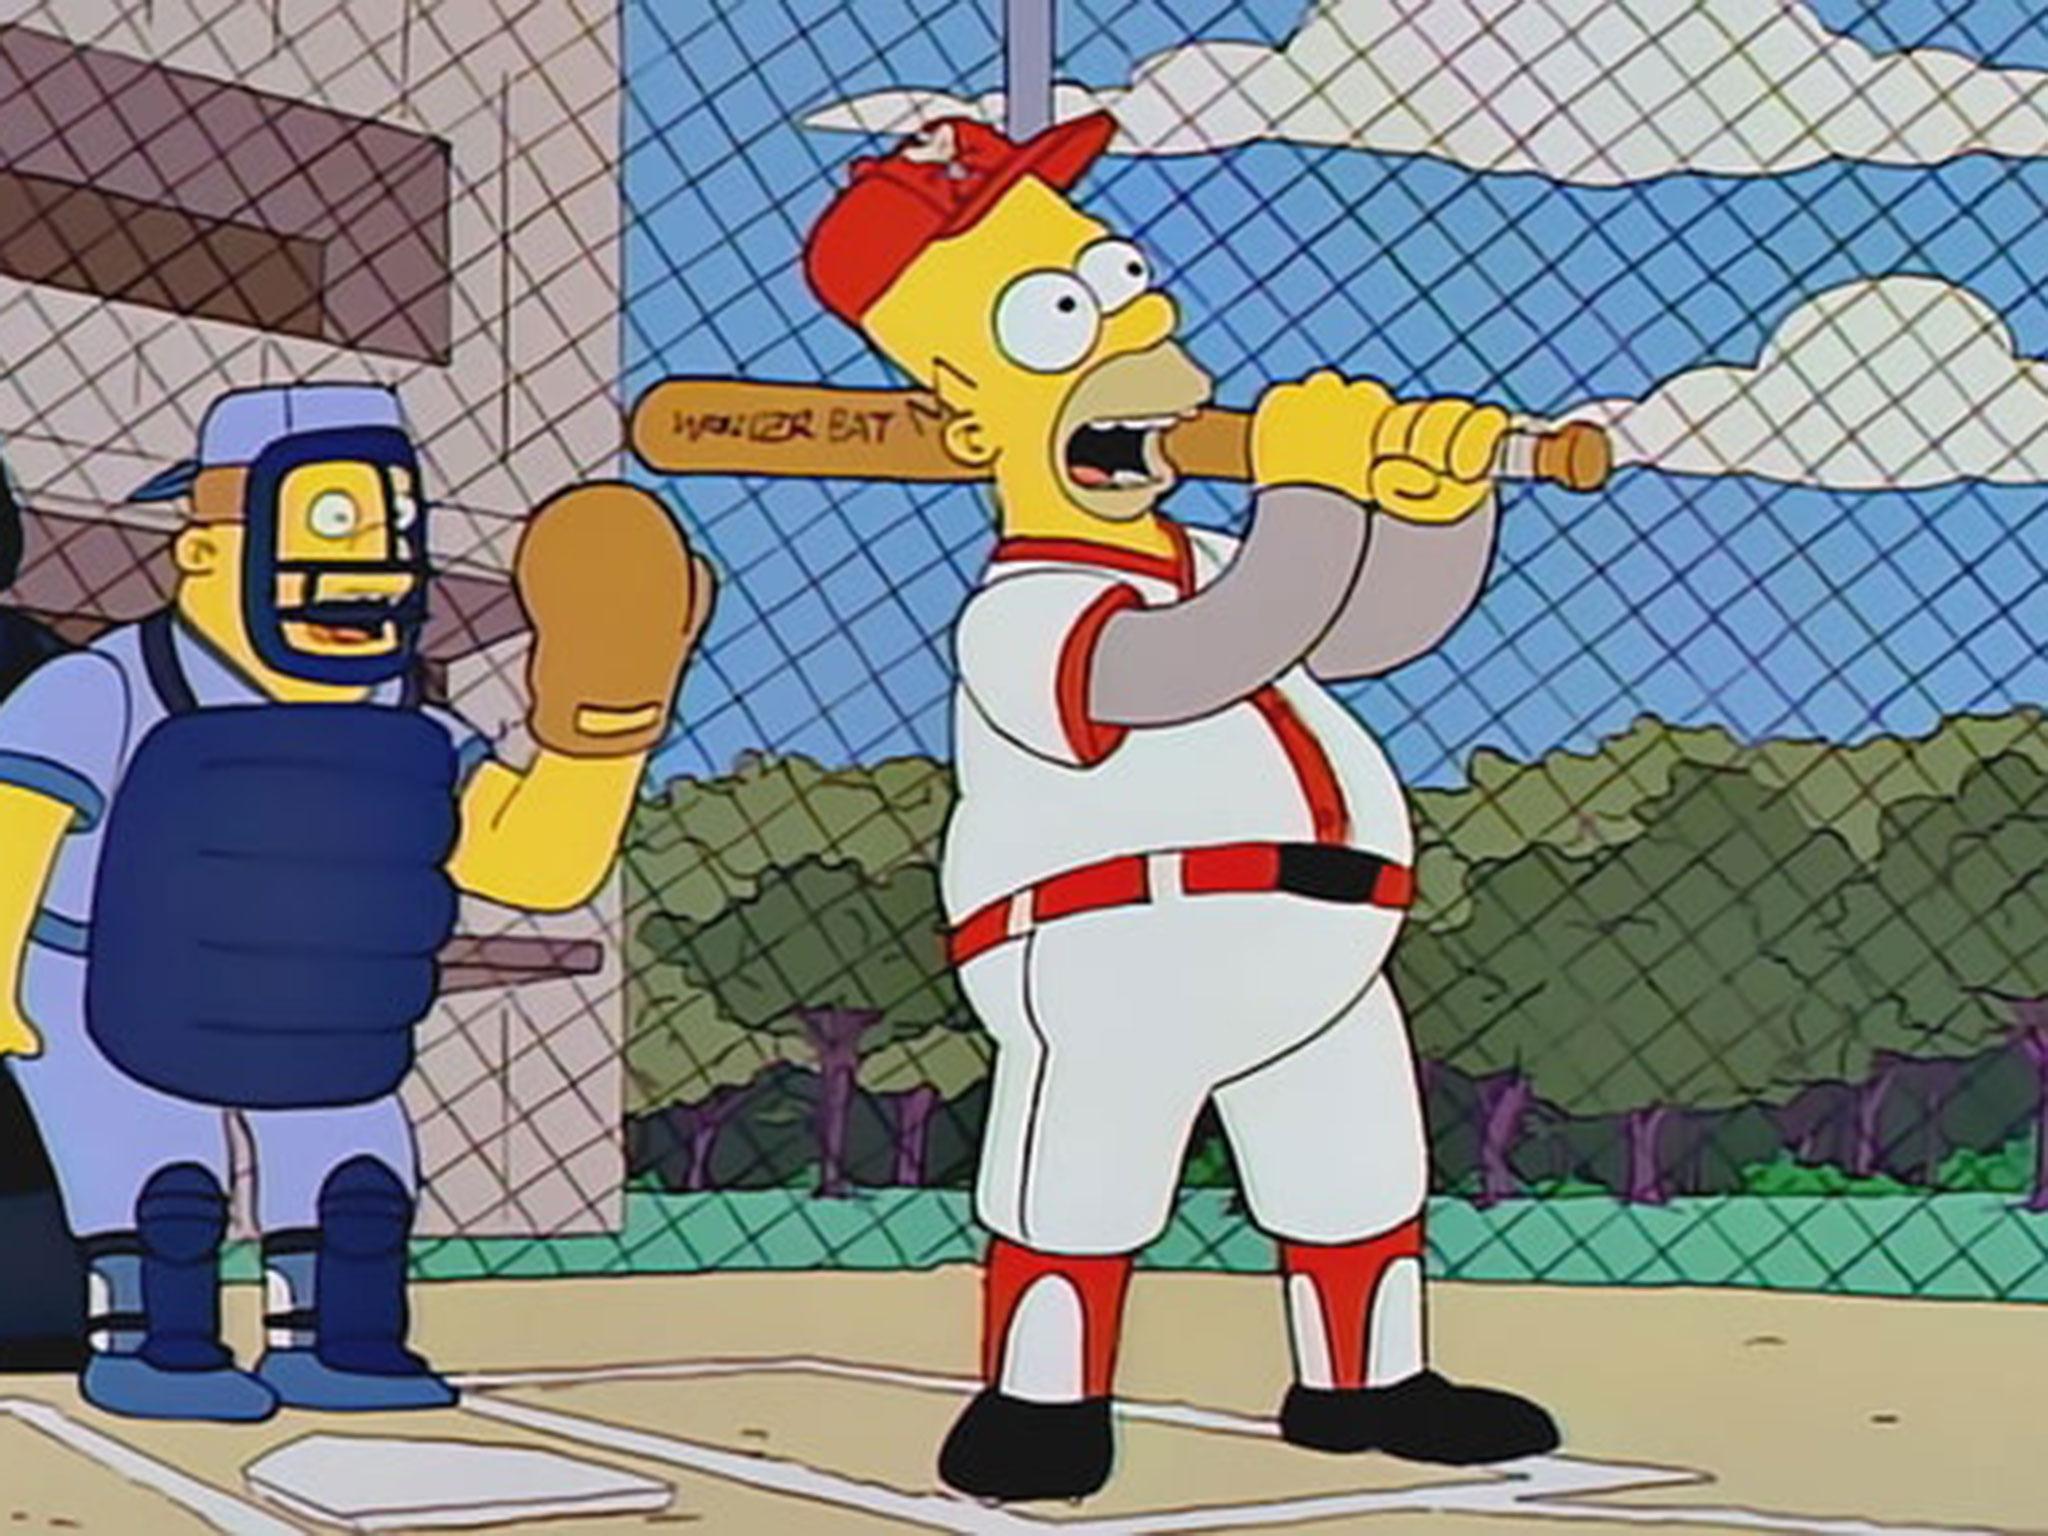 Homer Simpson is set to be inducted in the baseball Hall of Fame